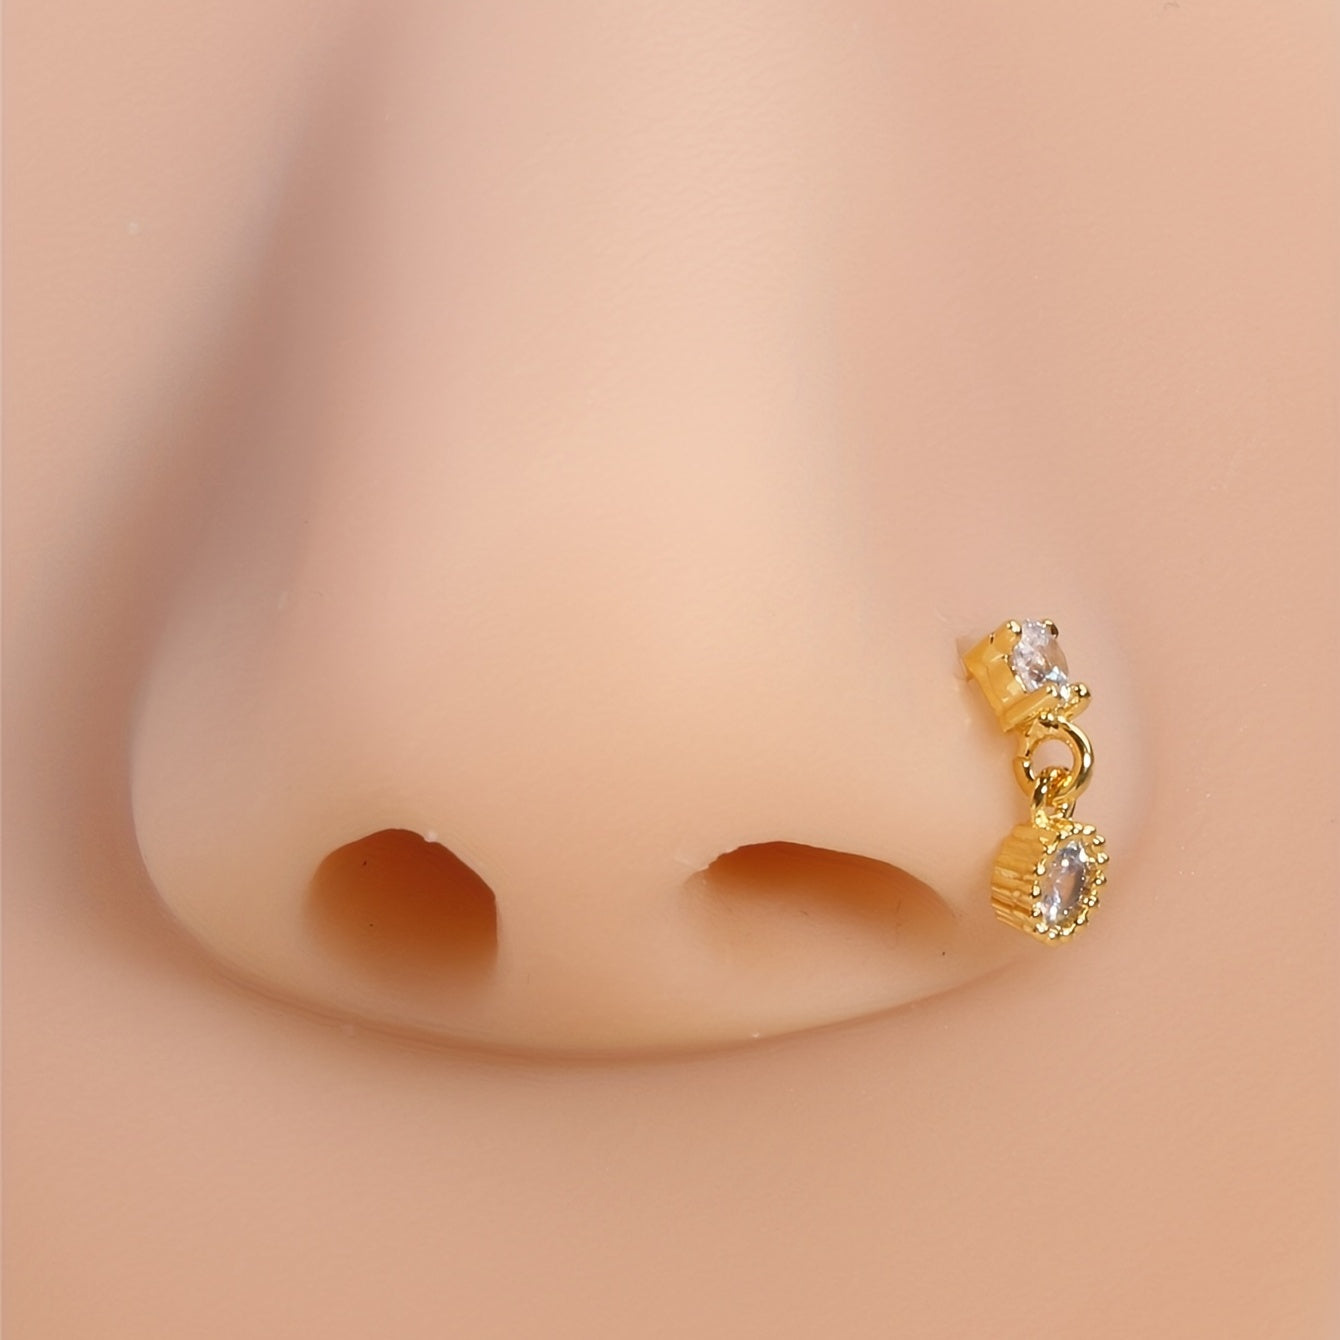 Add a Unique Touch to Your Look with our Dangle Nose Ring Inlaid with Round Cut Shiny Zircon - Perfect for Body Piercing Jewelry!